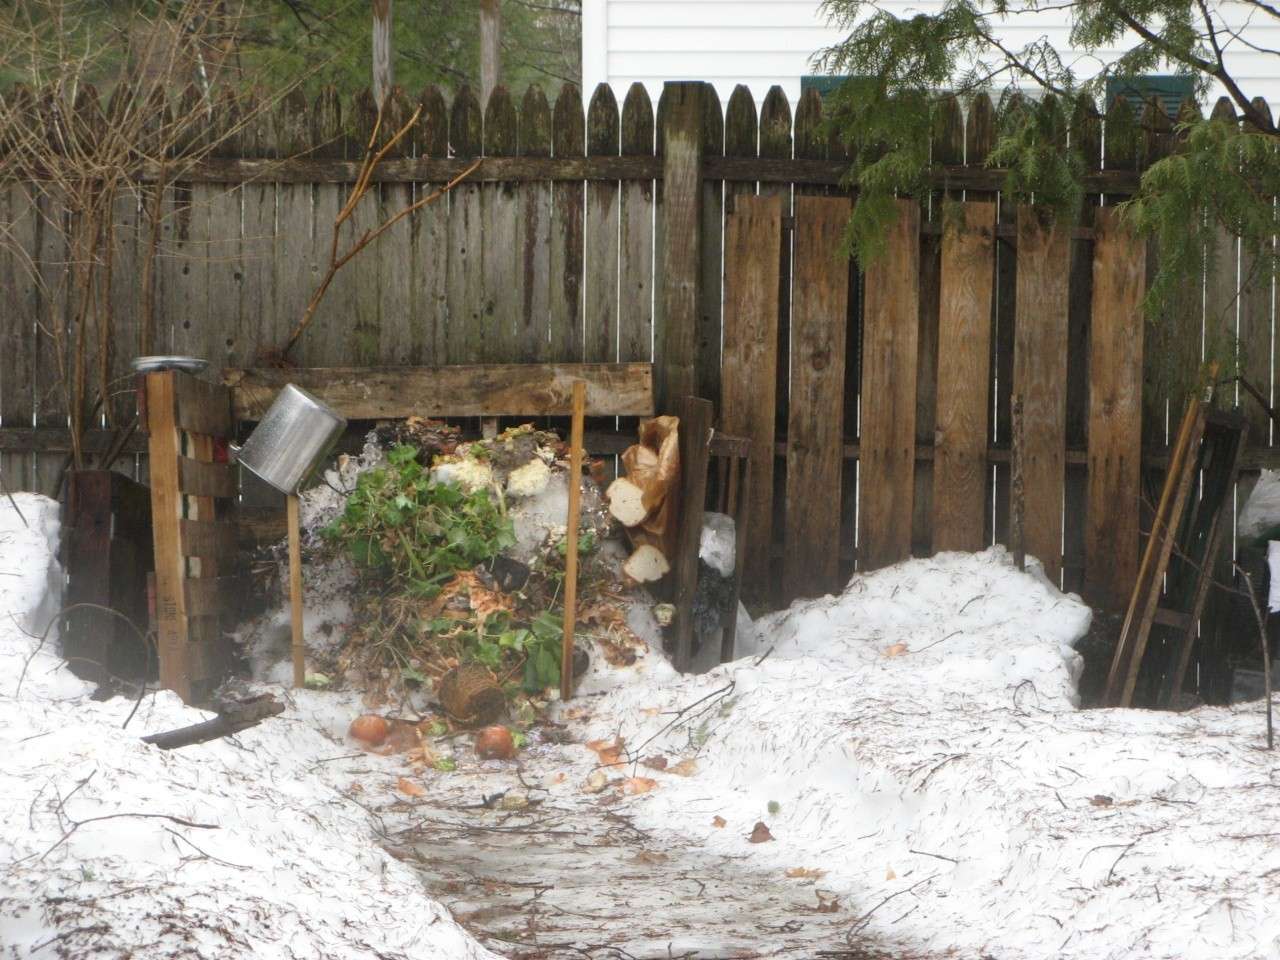 Please post pics of starter compost pile 09510